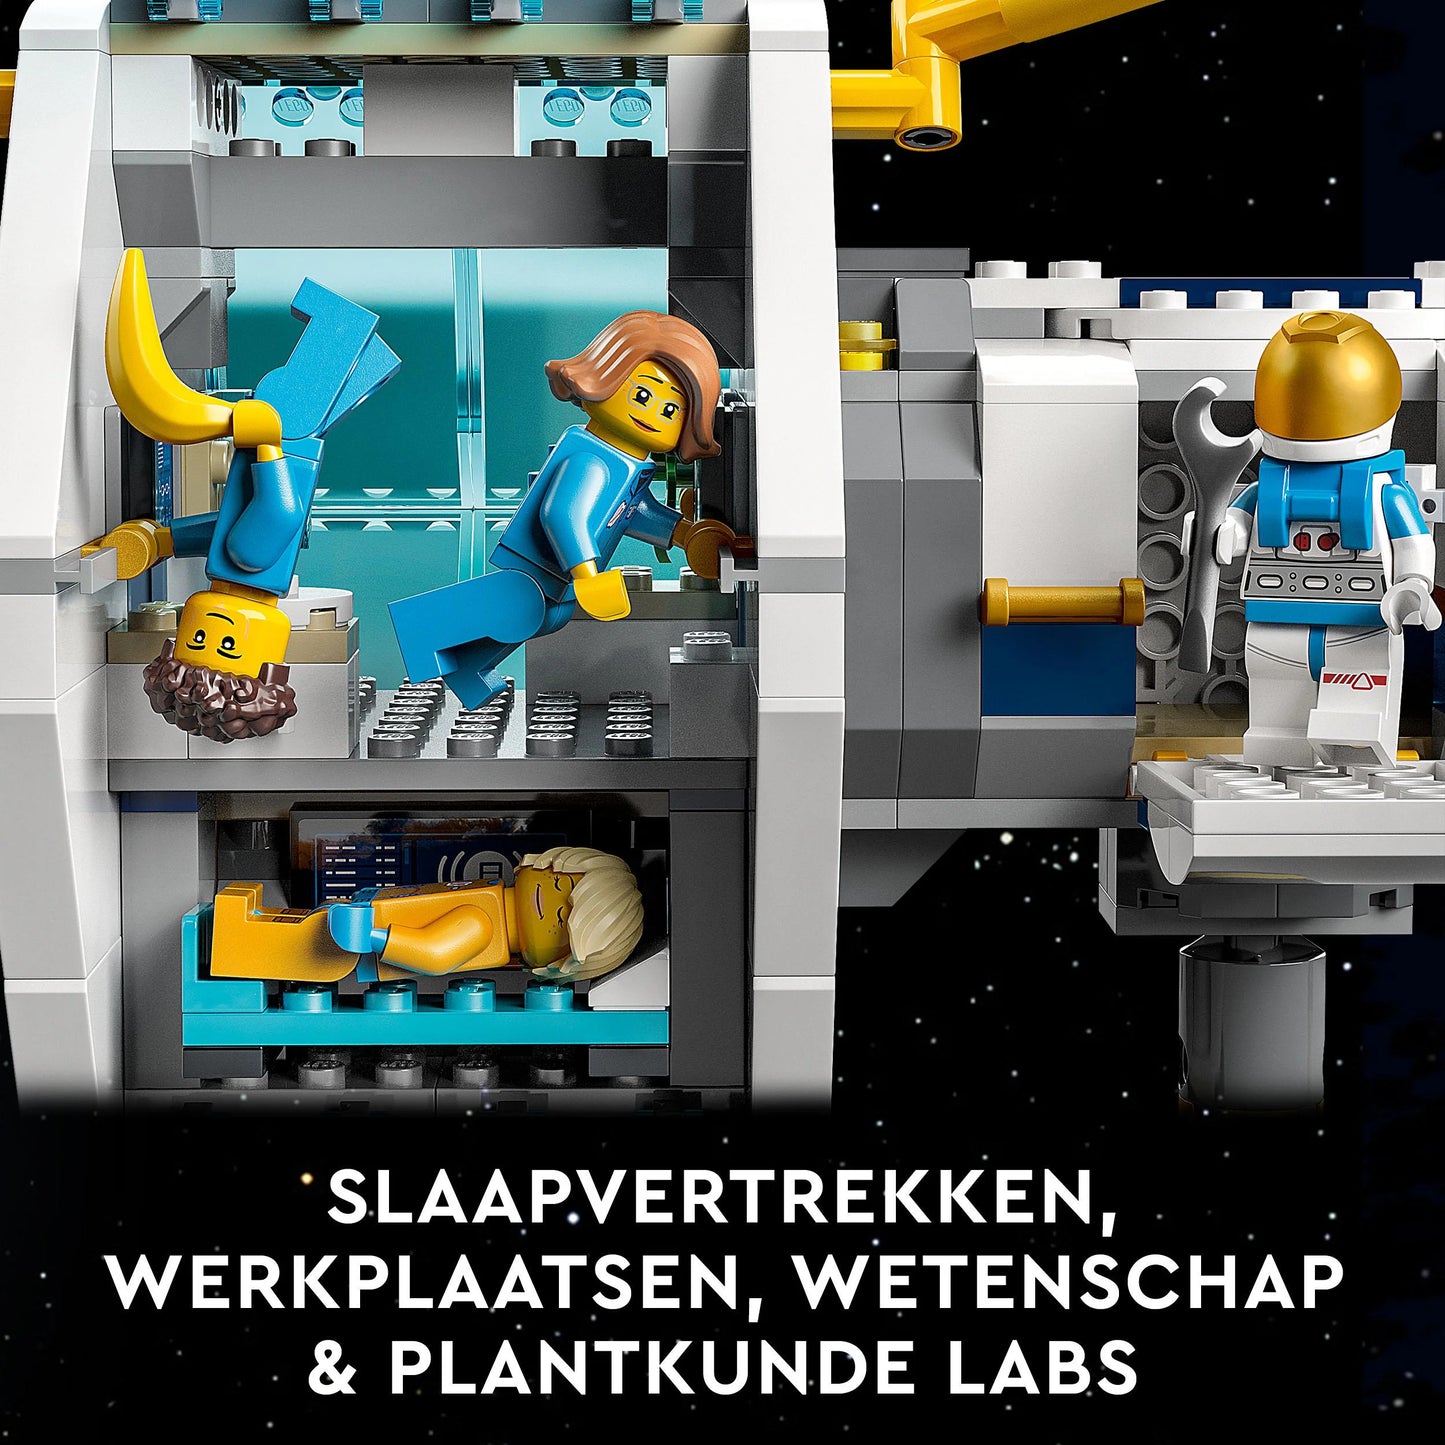 Space station on the moon - LEGO City